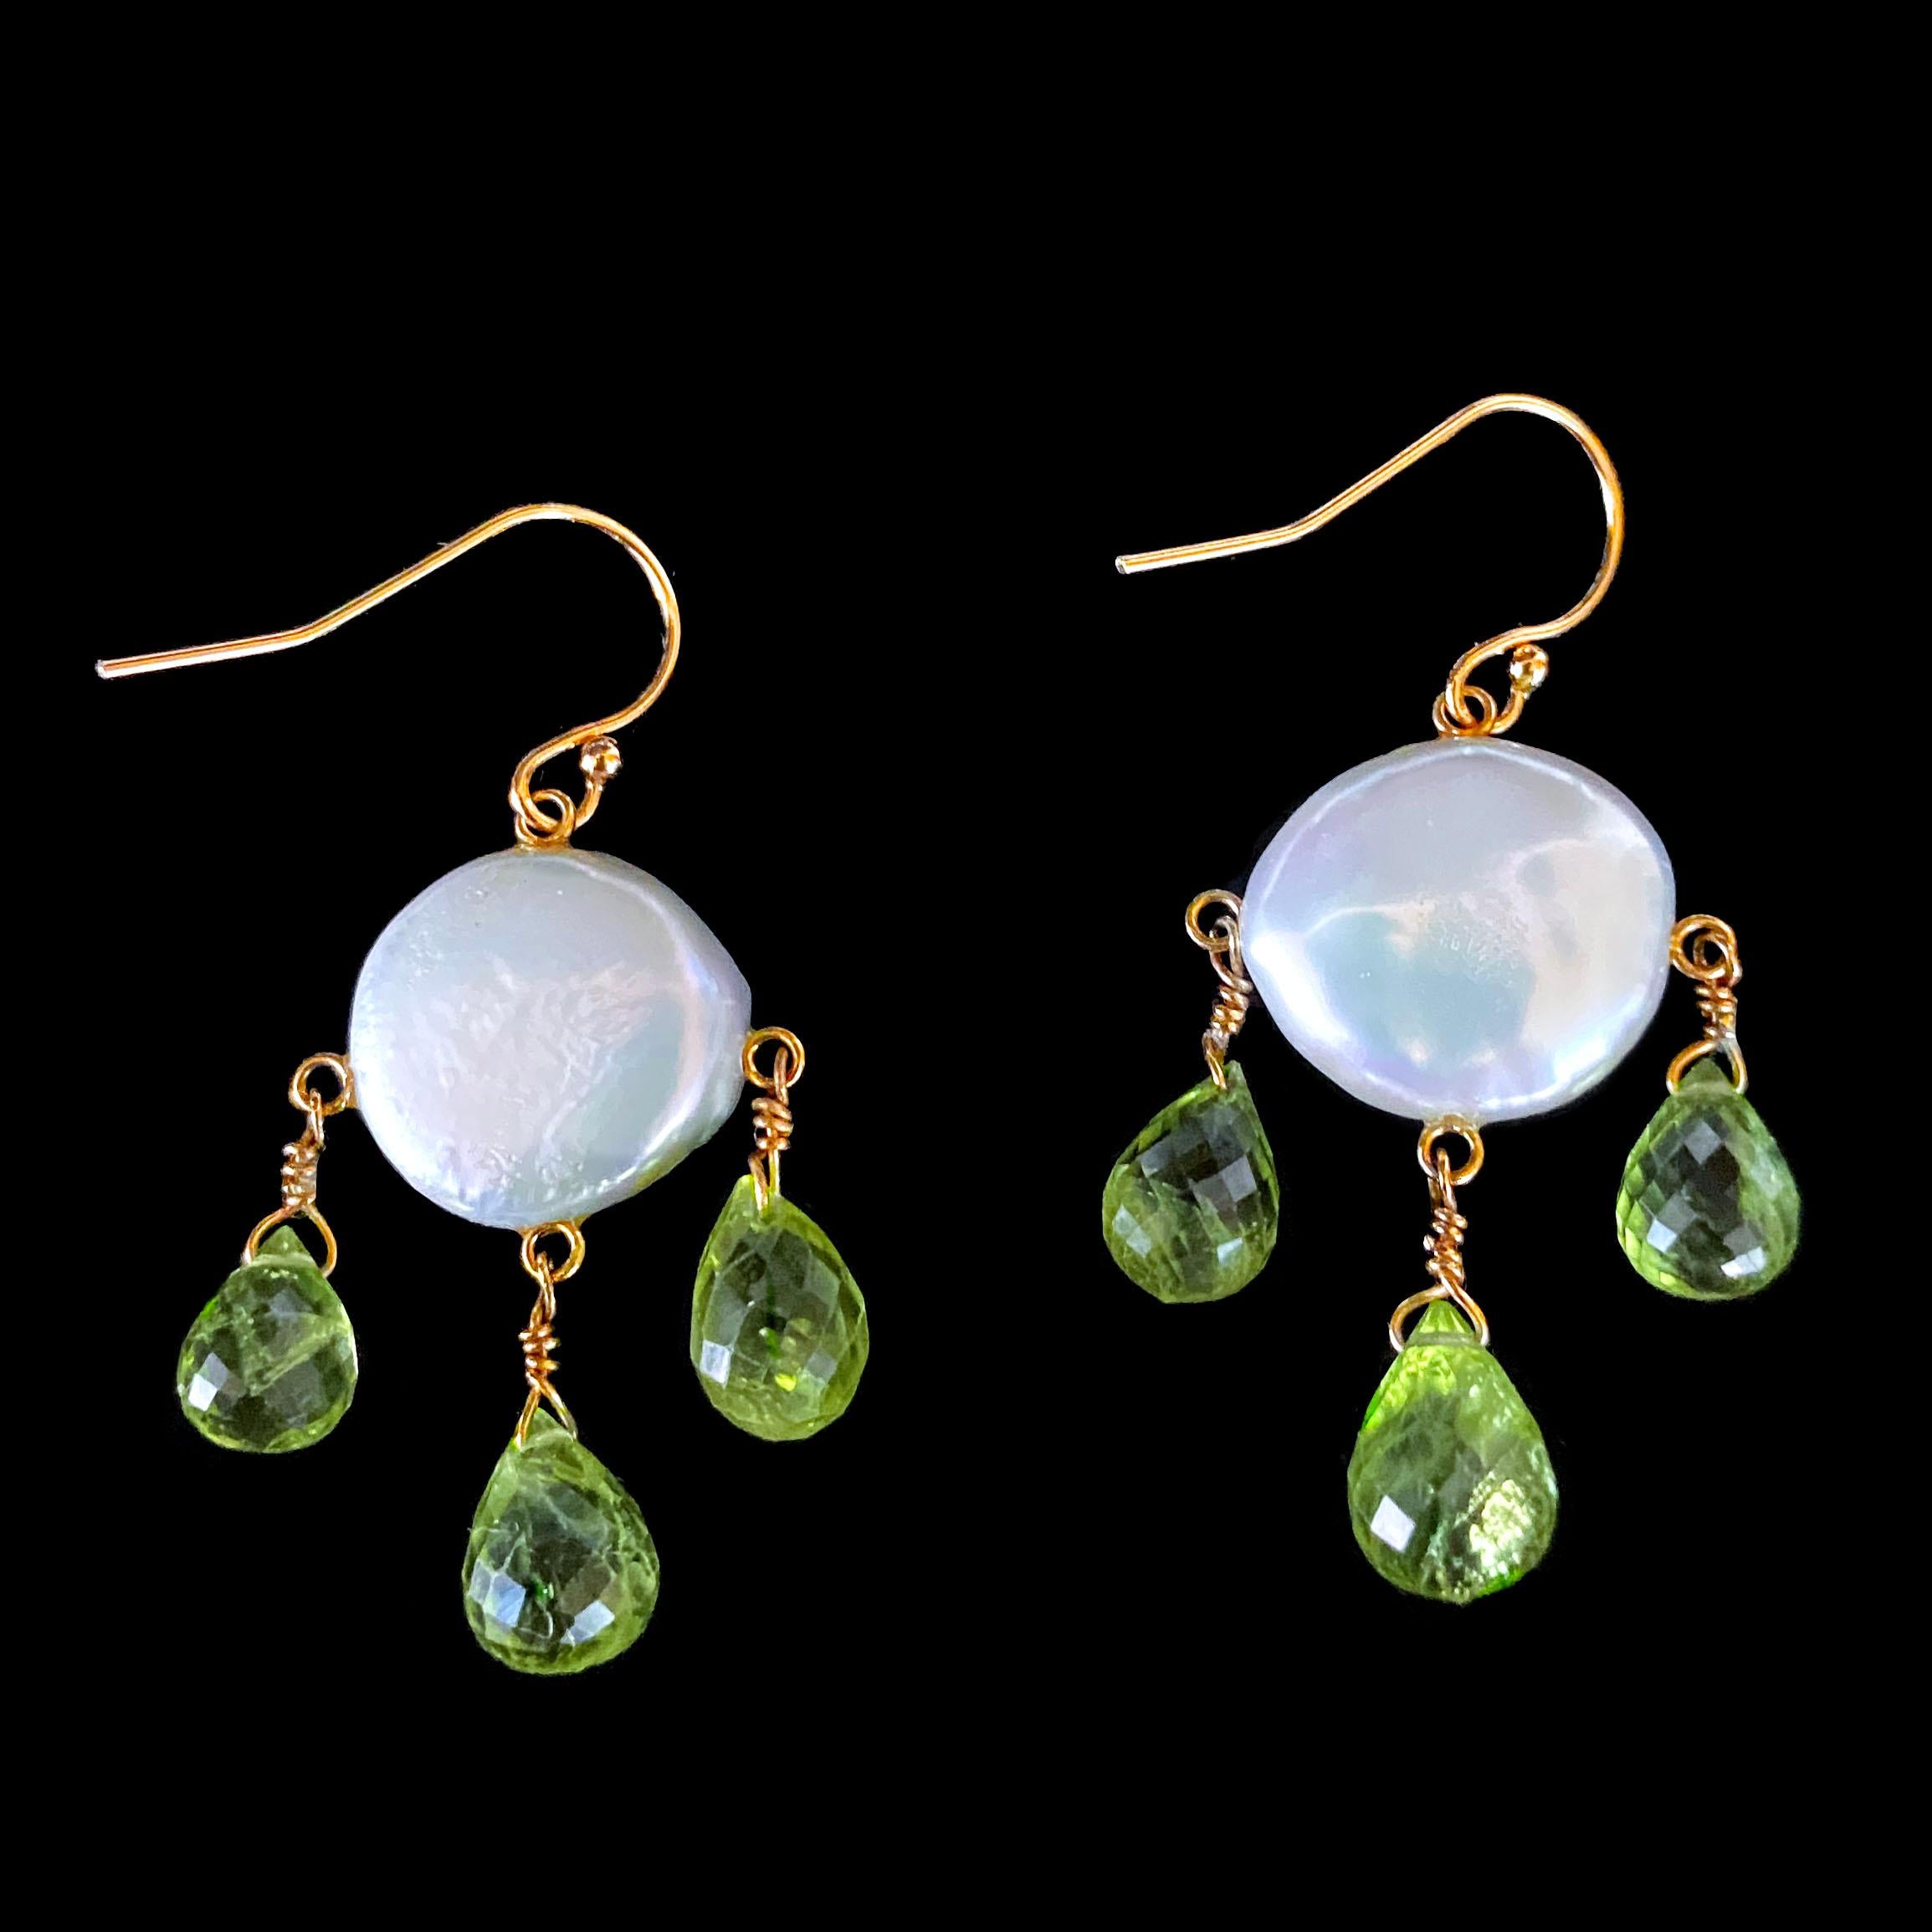 Playful pair of earrings by Marina J. These Earrings are made of two beautiful Flat Coin Pearls with a soft multi color iridescent luster. Three Teardrop shaped Faceted Peridots hang from the Pearl in a Chandelier like fashion. Due to the stone's